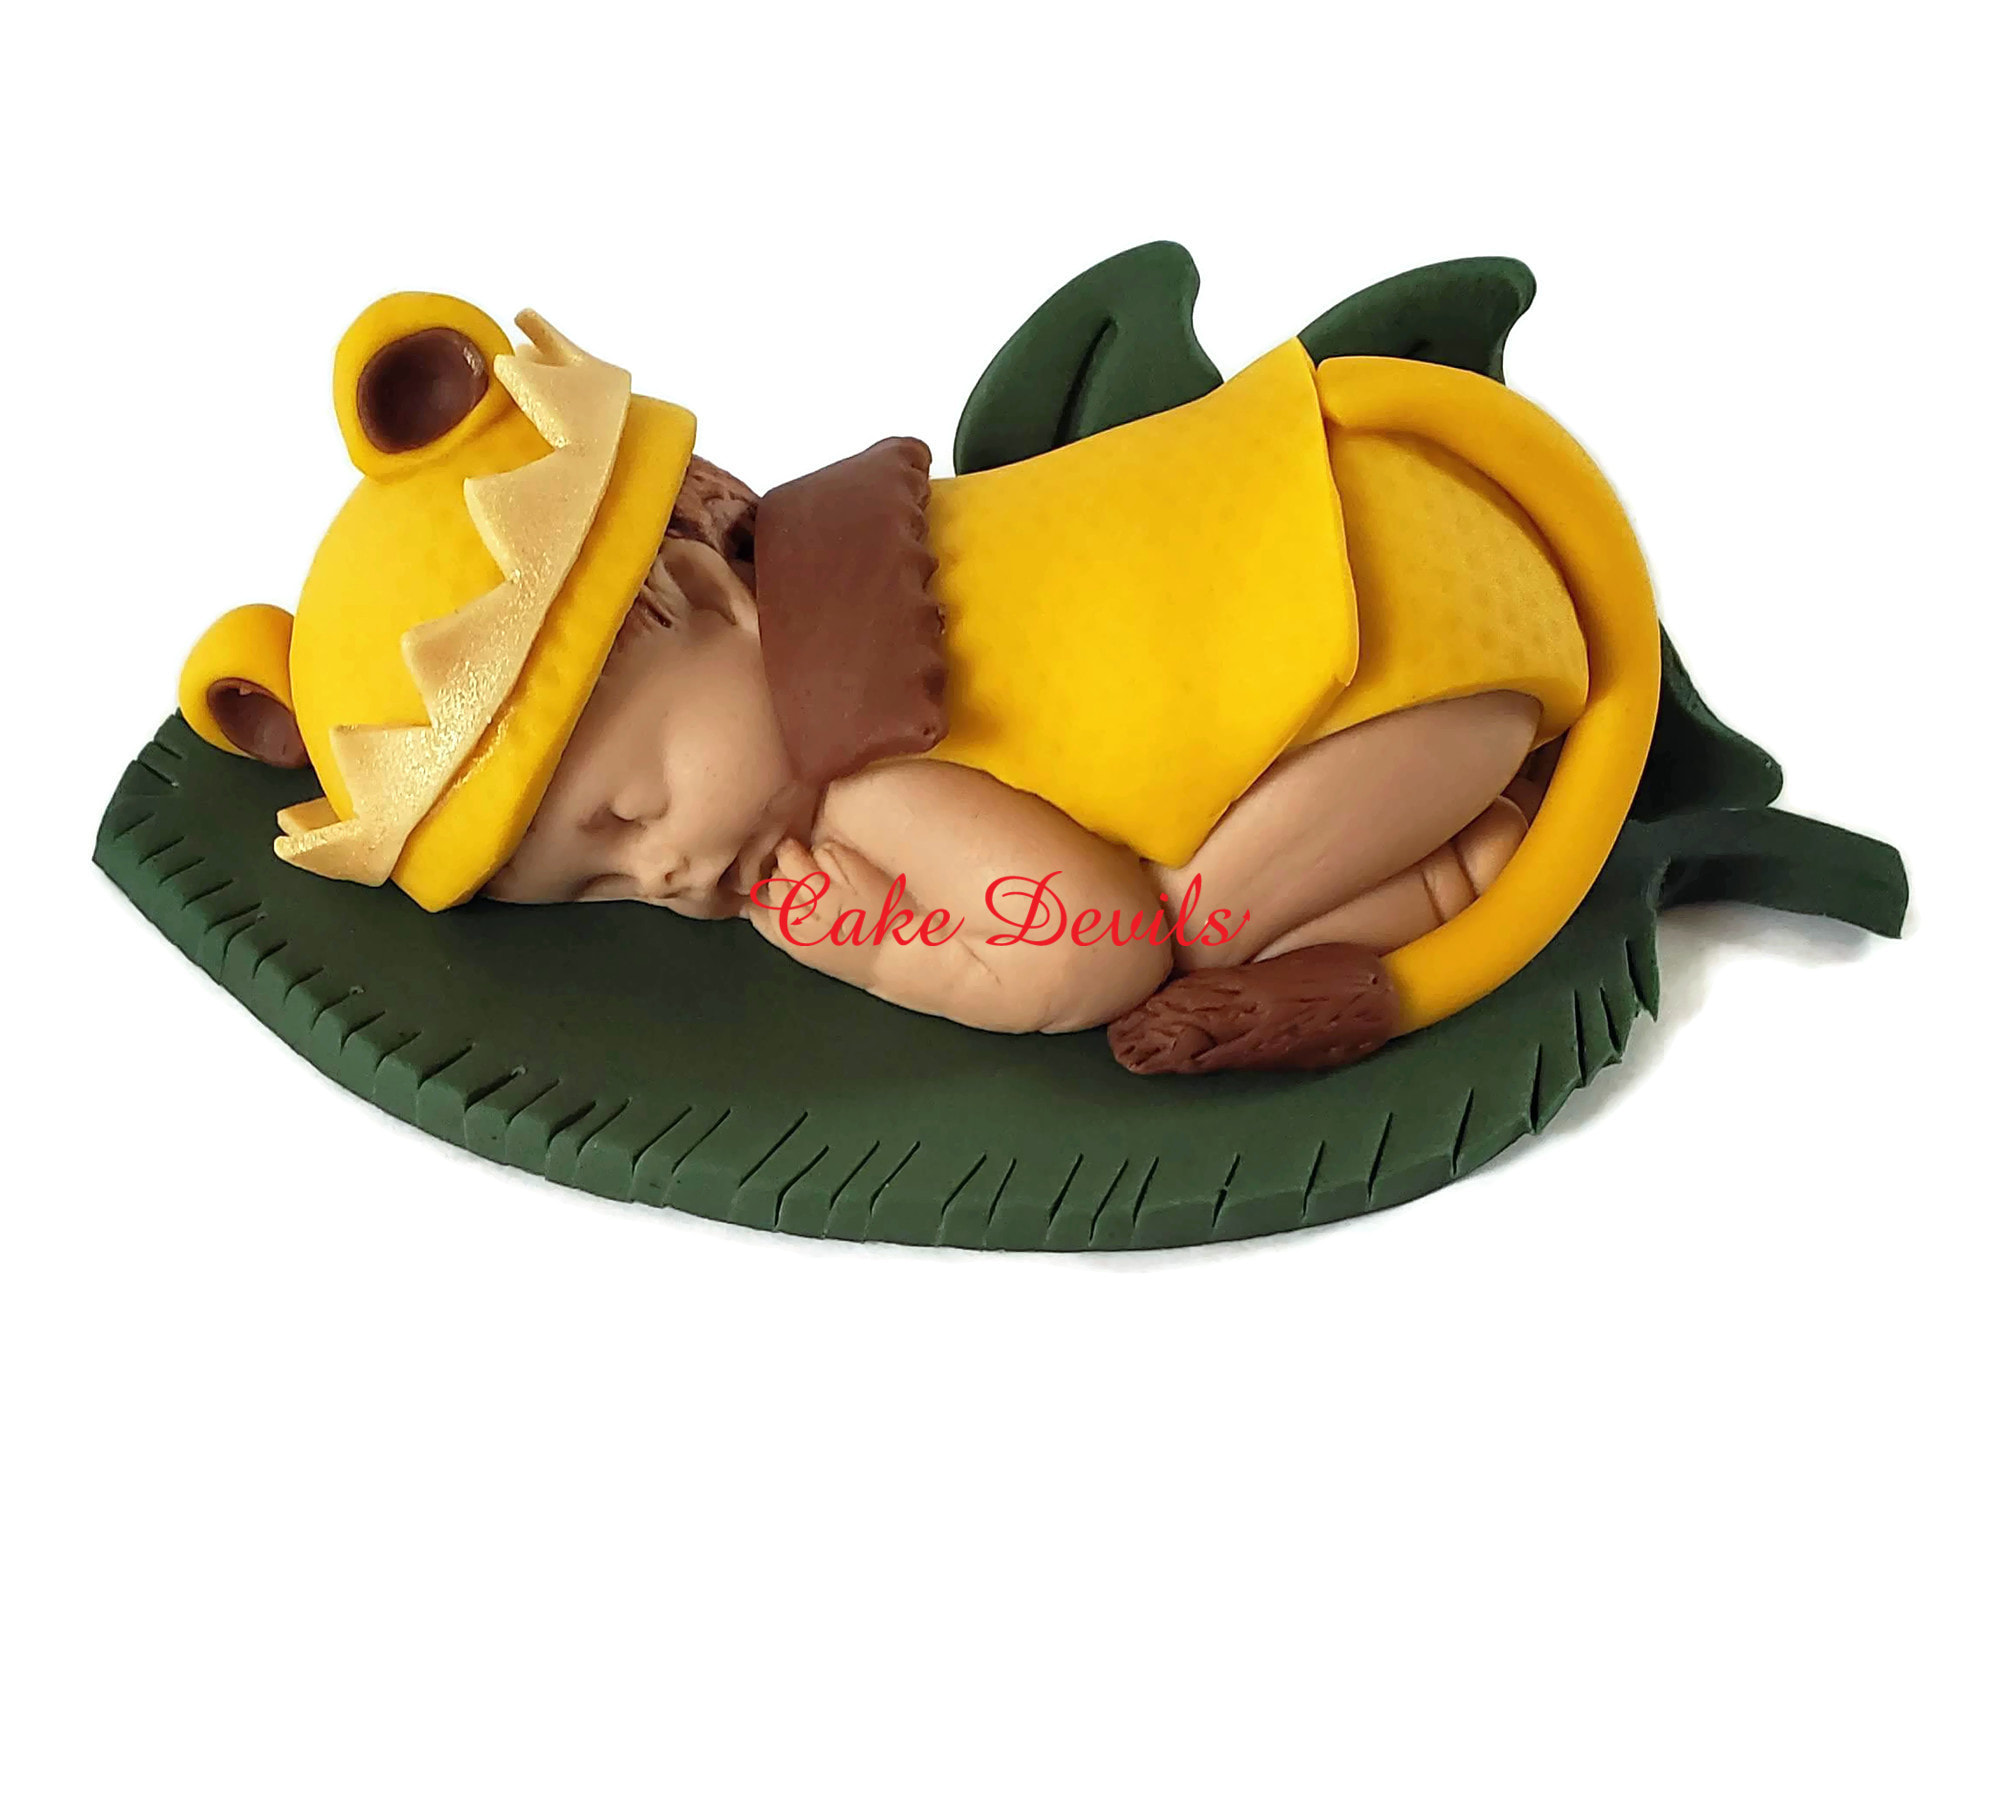 Lion Baby Shower Cake Topper, Fondant Sleeping baby, King of the Jungle  Baby Shower Decorations, Lion with Crown, Handmade Edible